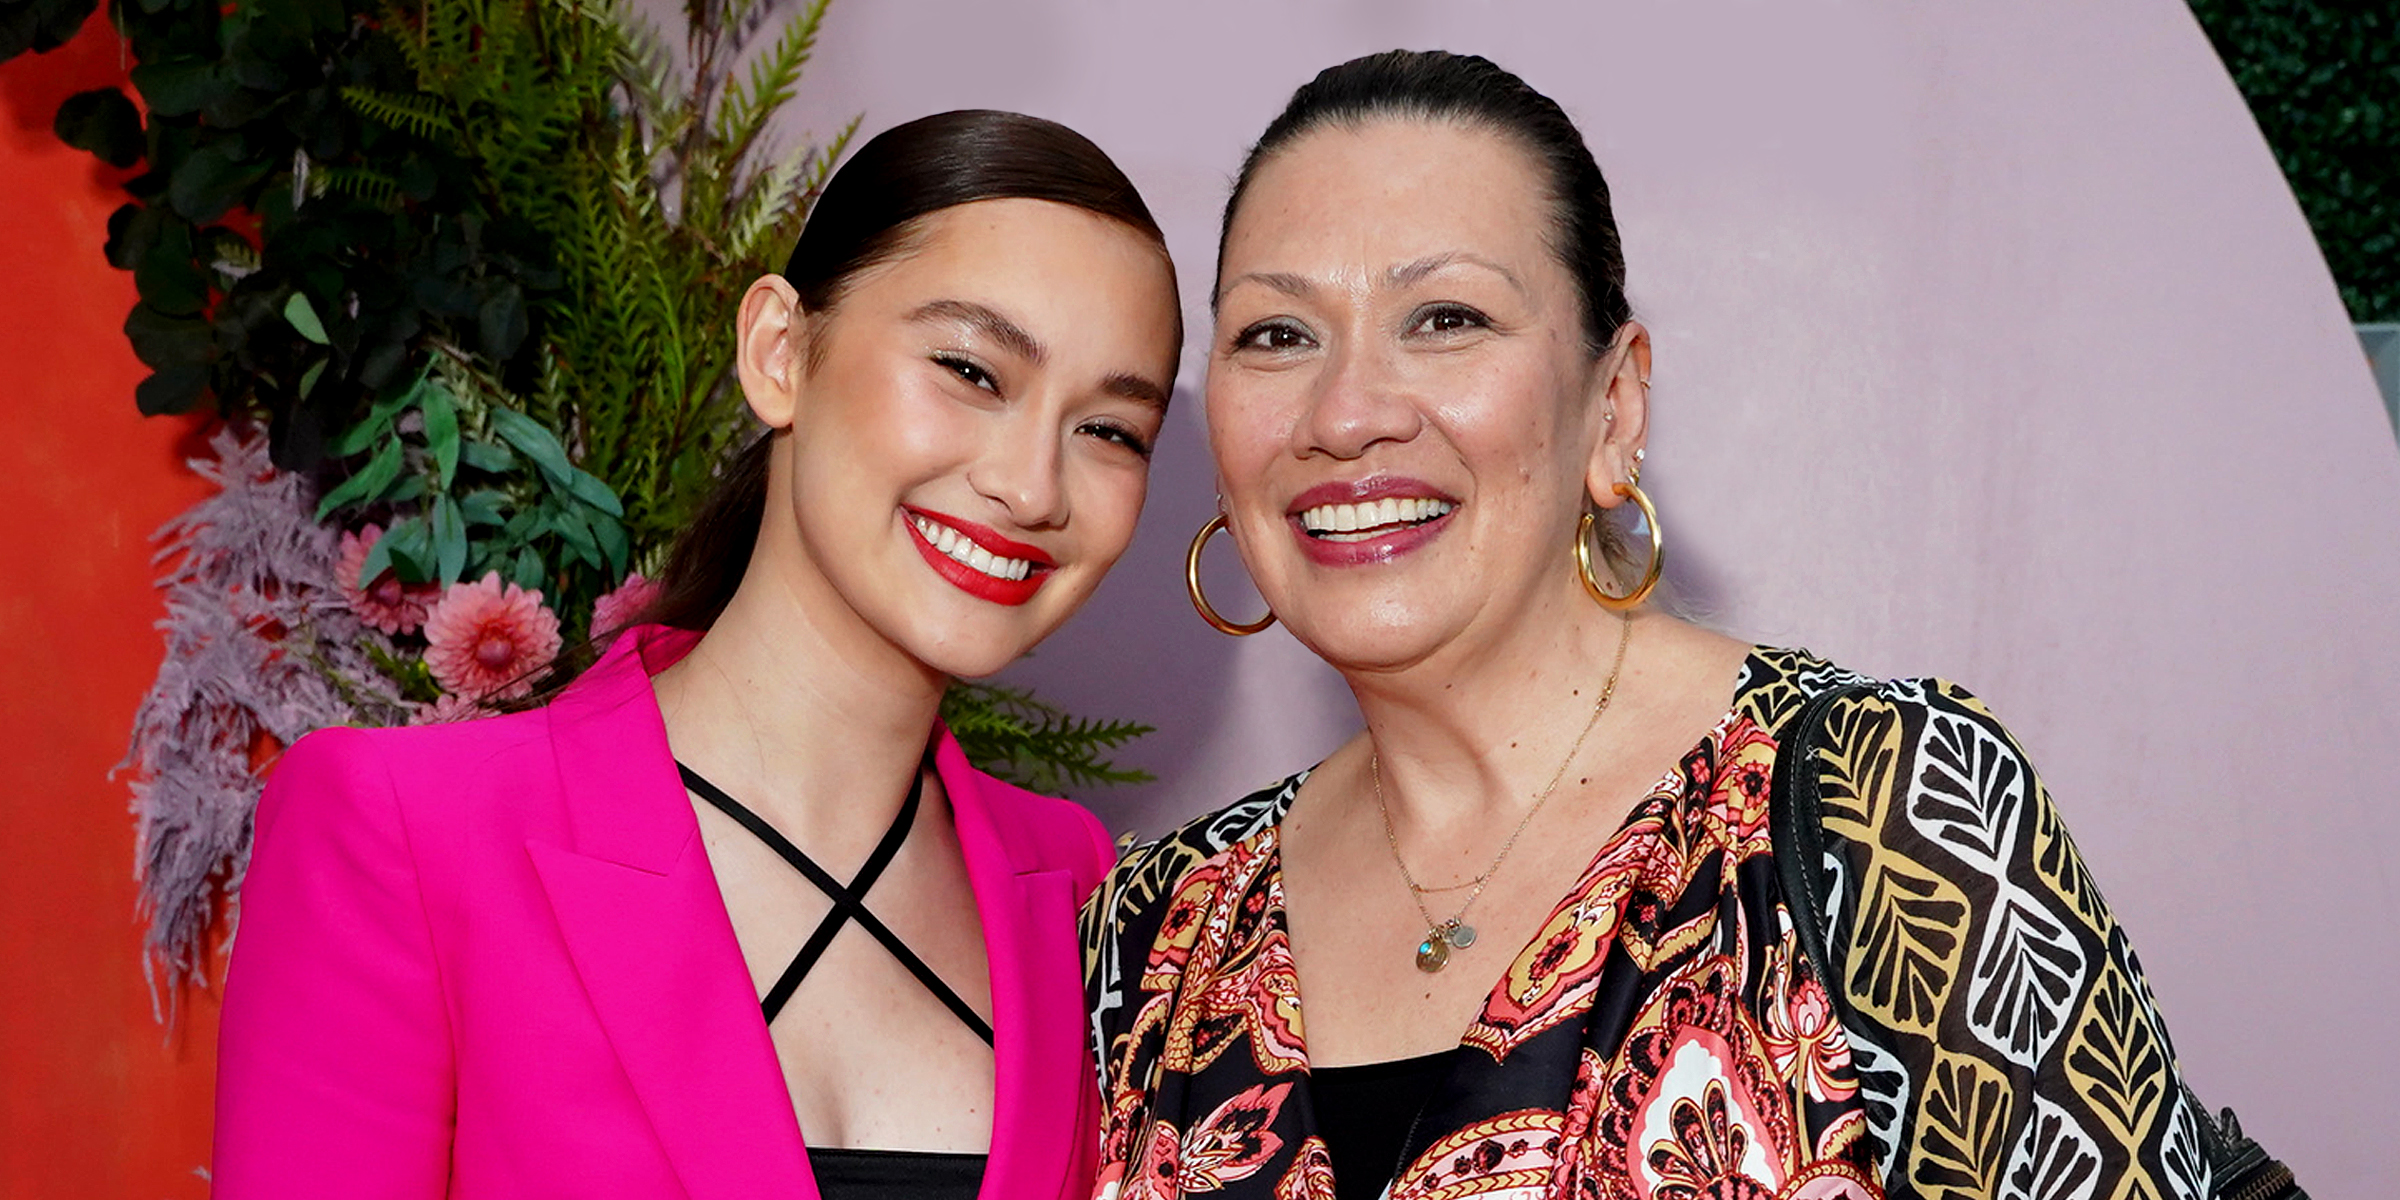 Lola Tung and Pia Tung | Source: Getty Images